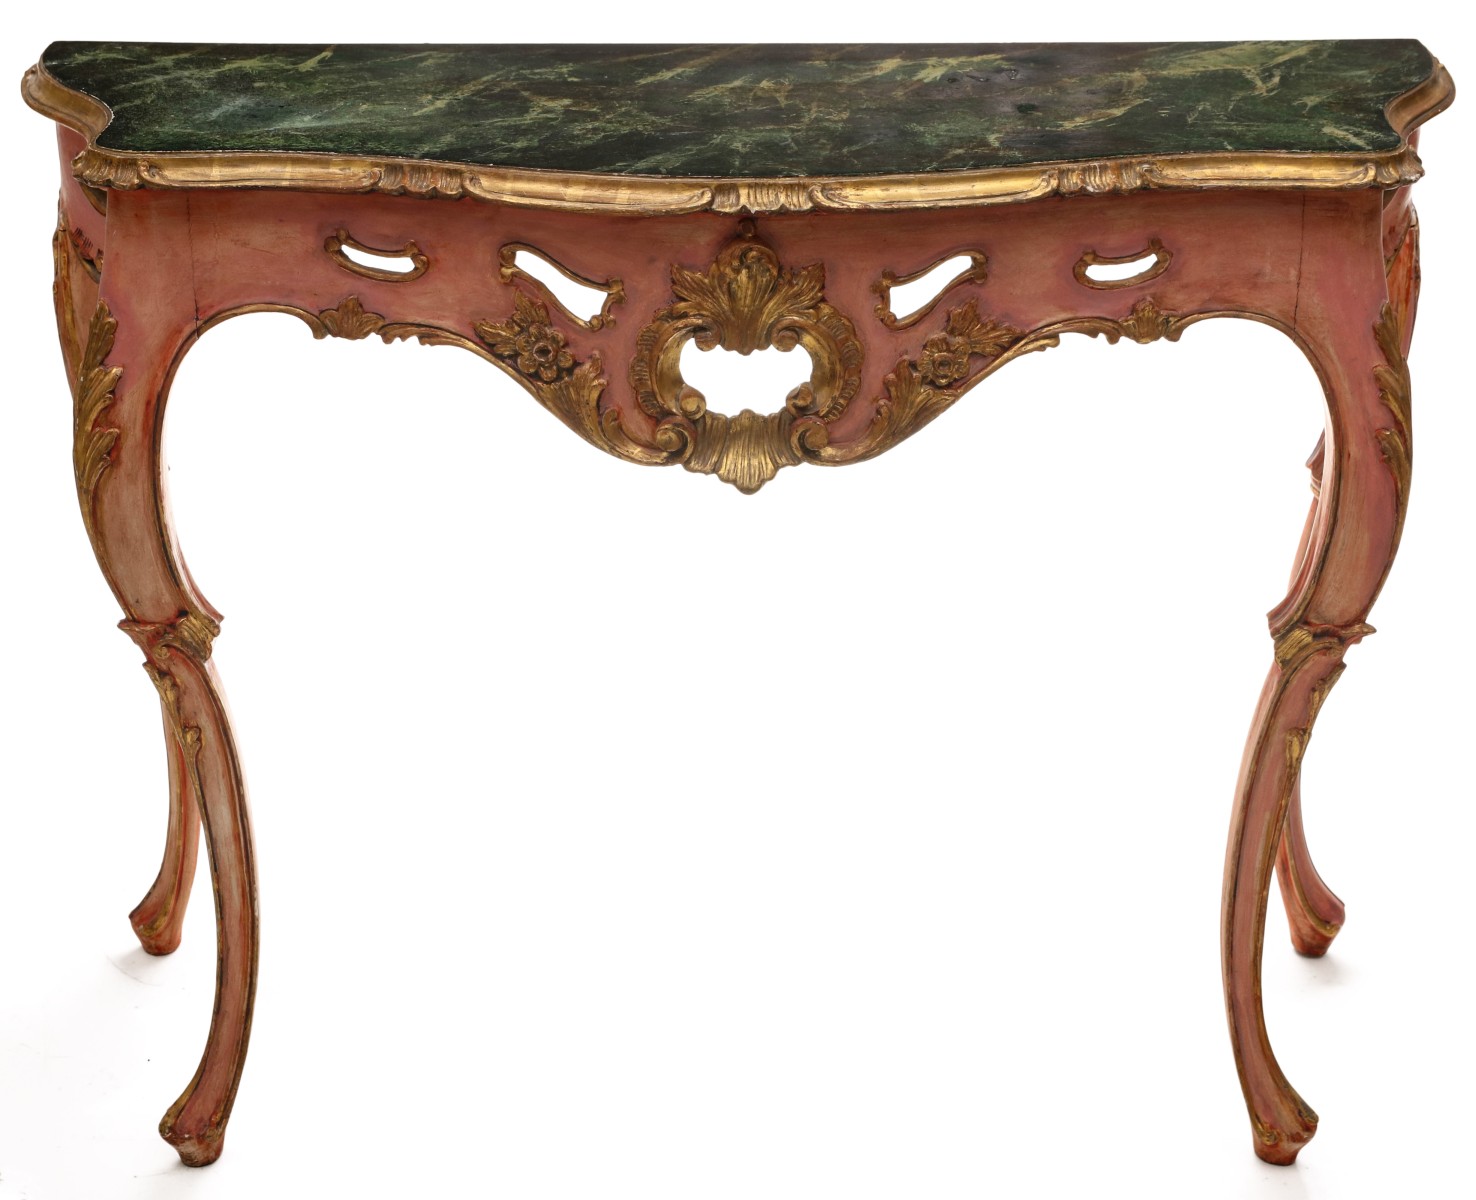 A FRENCH LOUIS XV STYLE FAUX MARBLE CONSOLE